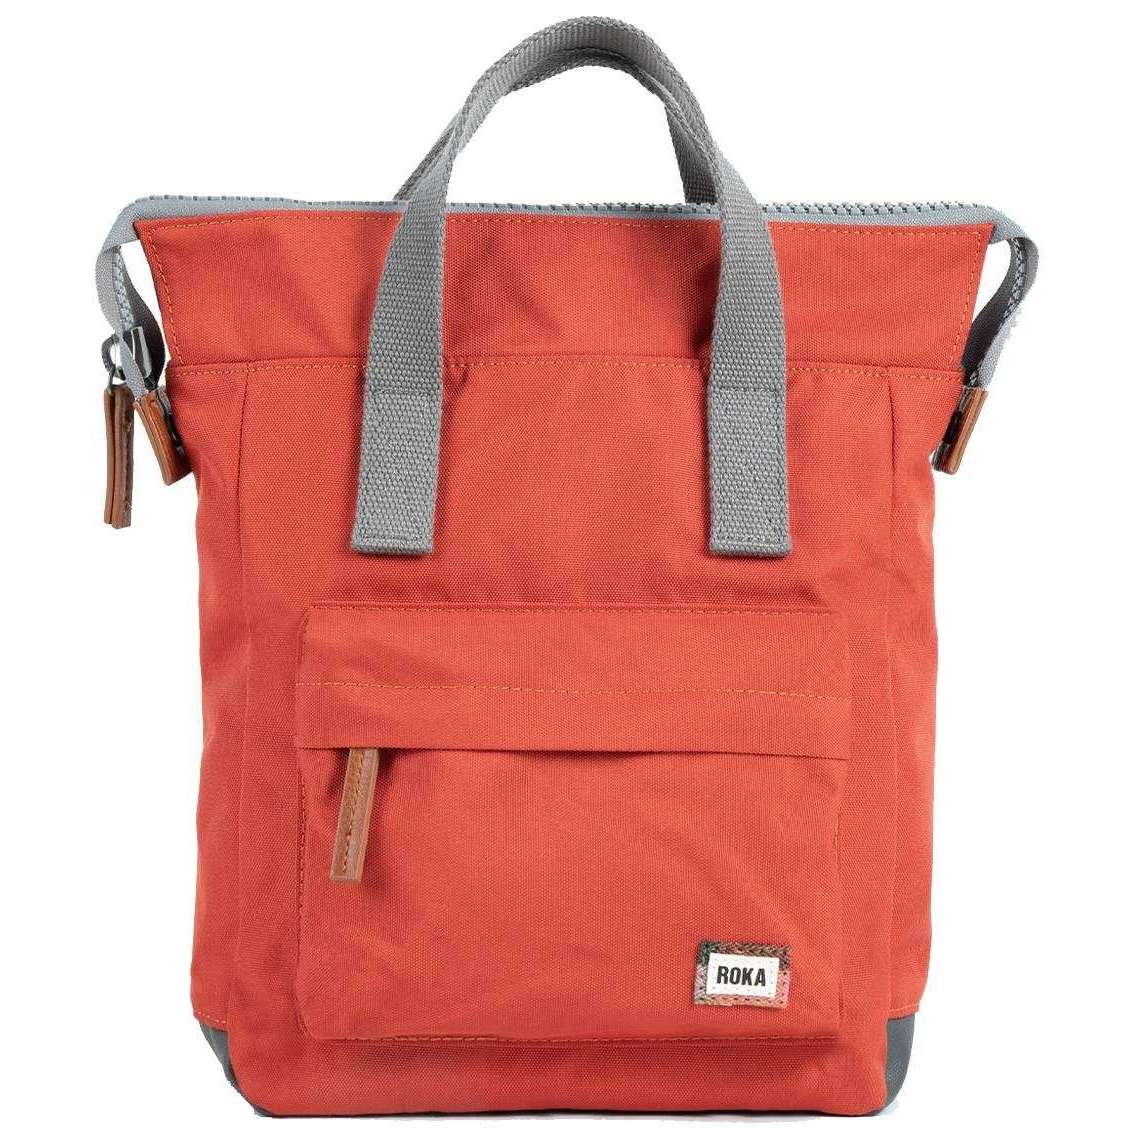 Roka Bantry B Small Sustainable Canvas Flannel Backpack - Ginger Orange